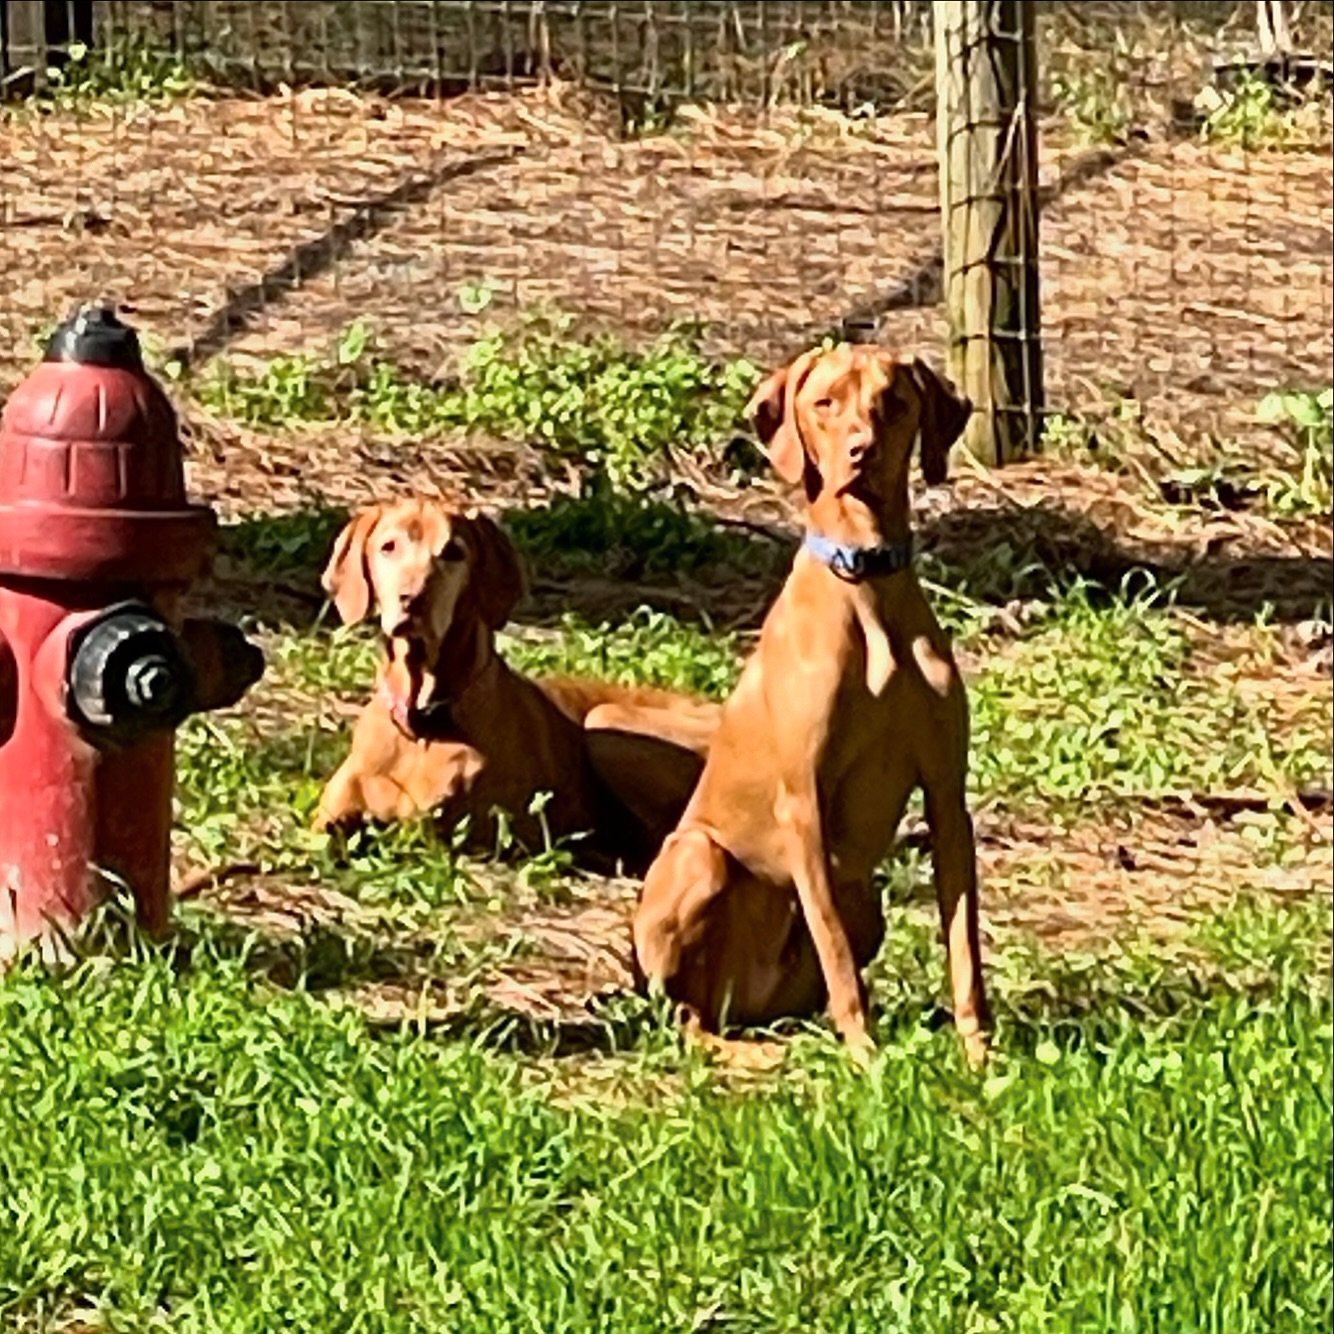 Did someone say dinner time???🐾
🐶Maggie &amp; Oscar, 6.5 year old and 1.5 year old Vizslas from Davis, CA
.
.
.
#dogboarding #dogdaycare #vizsla